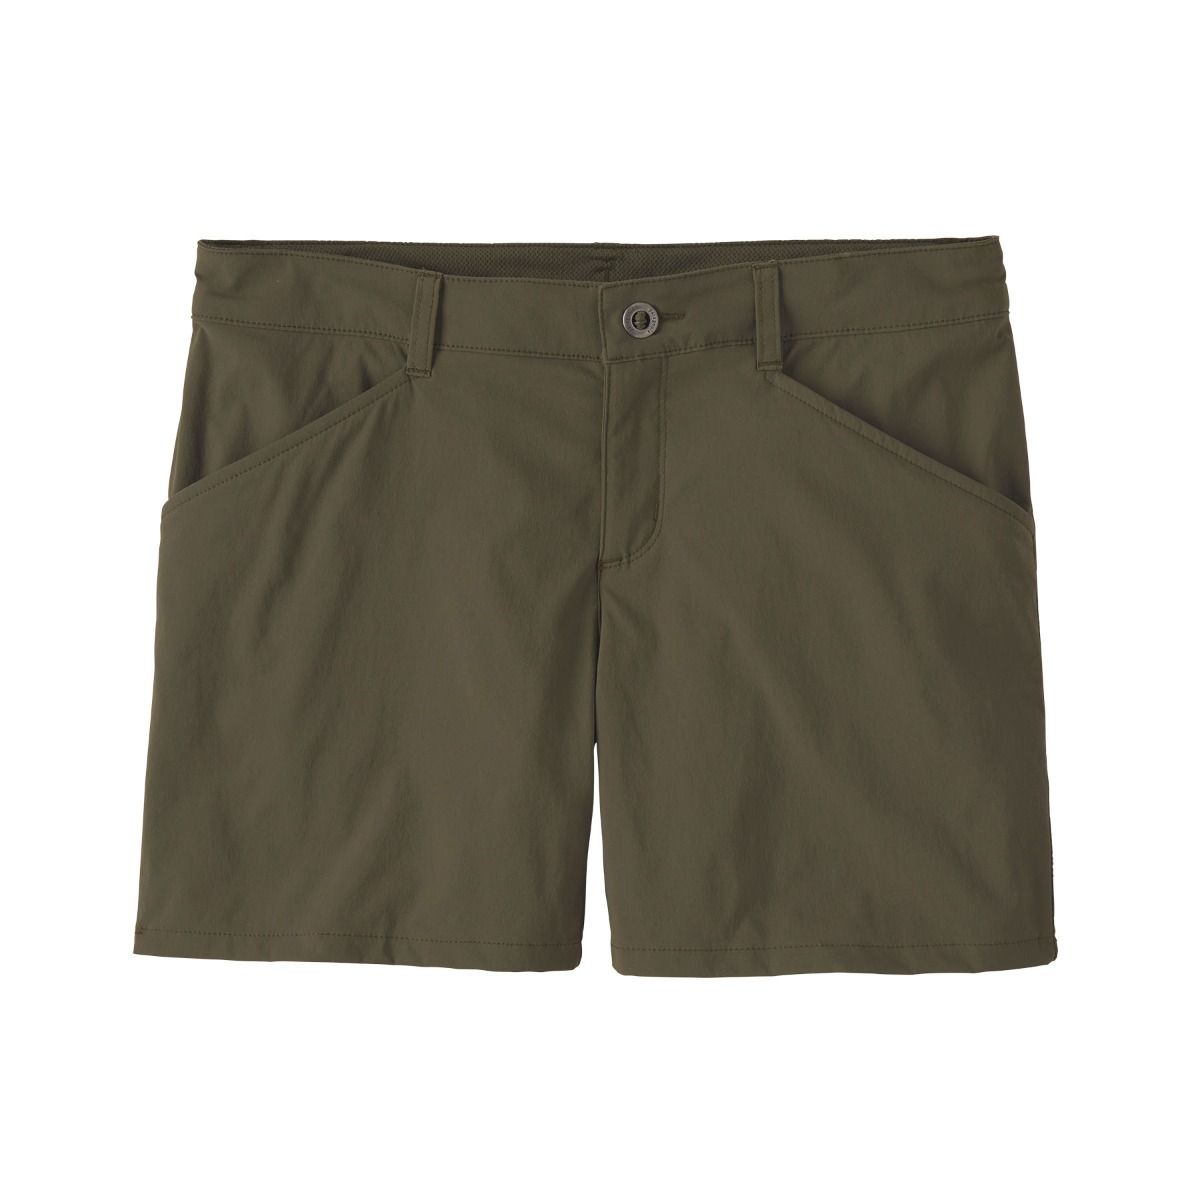 Patagonia - W's Quandary Shorts - 5 in